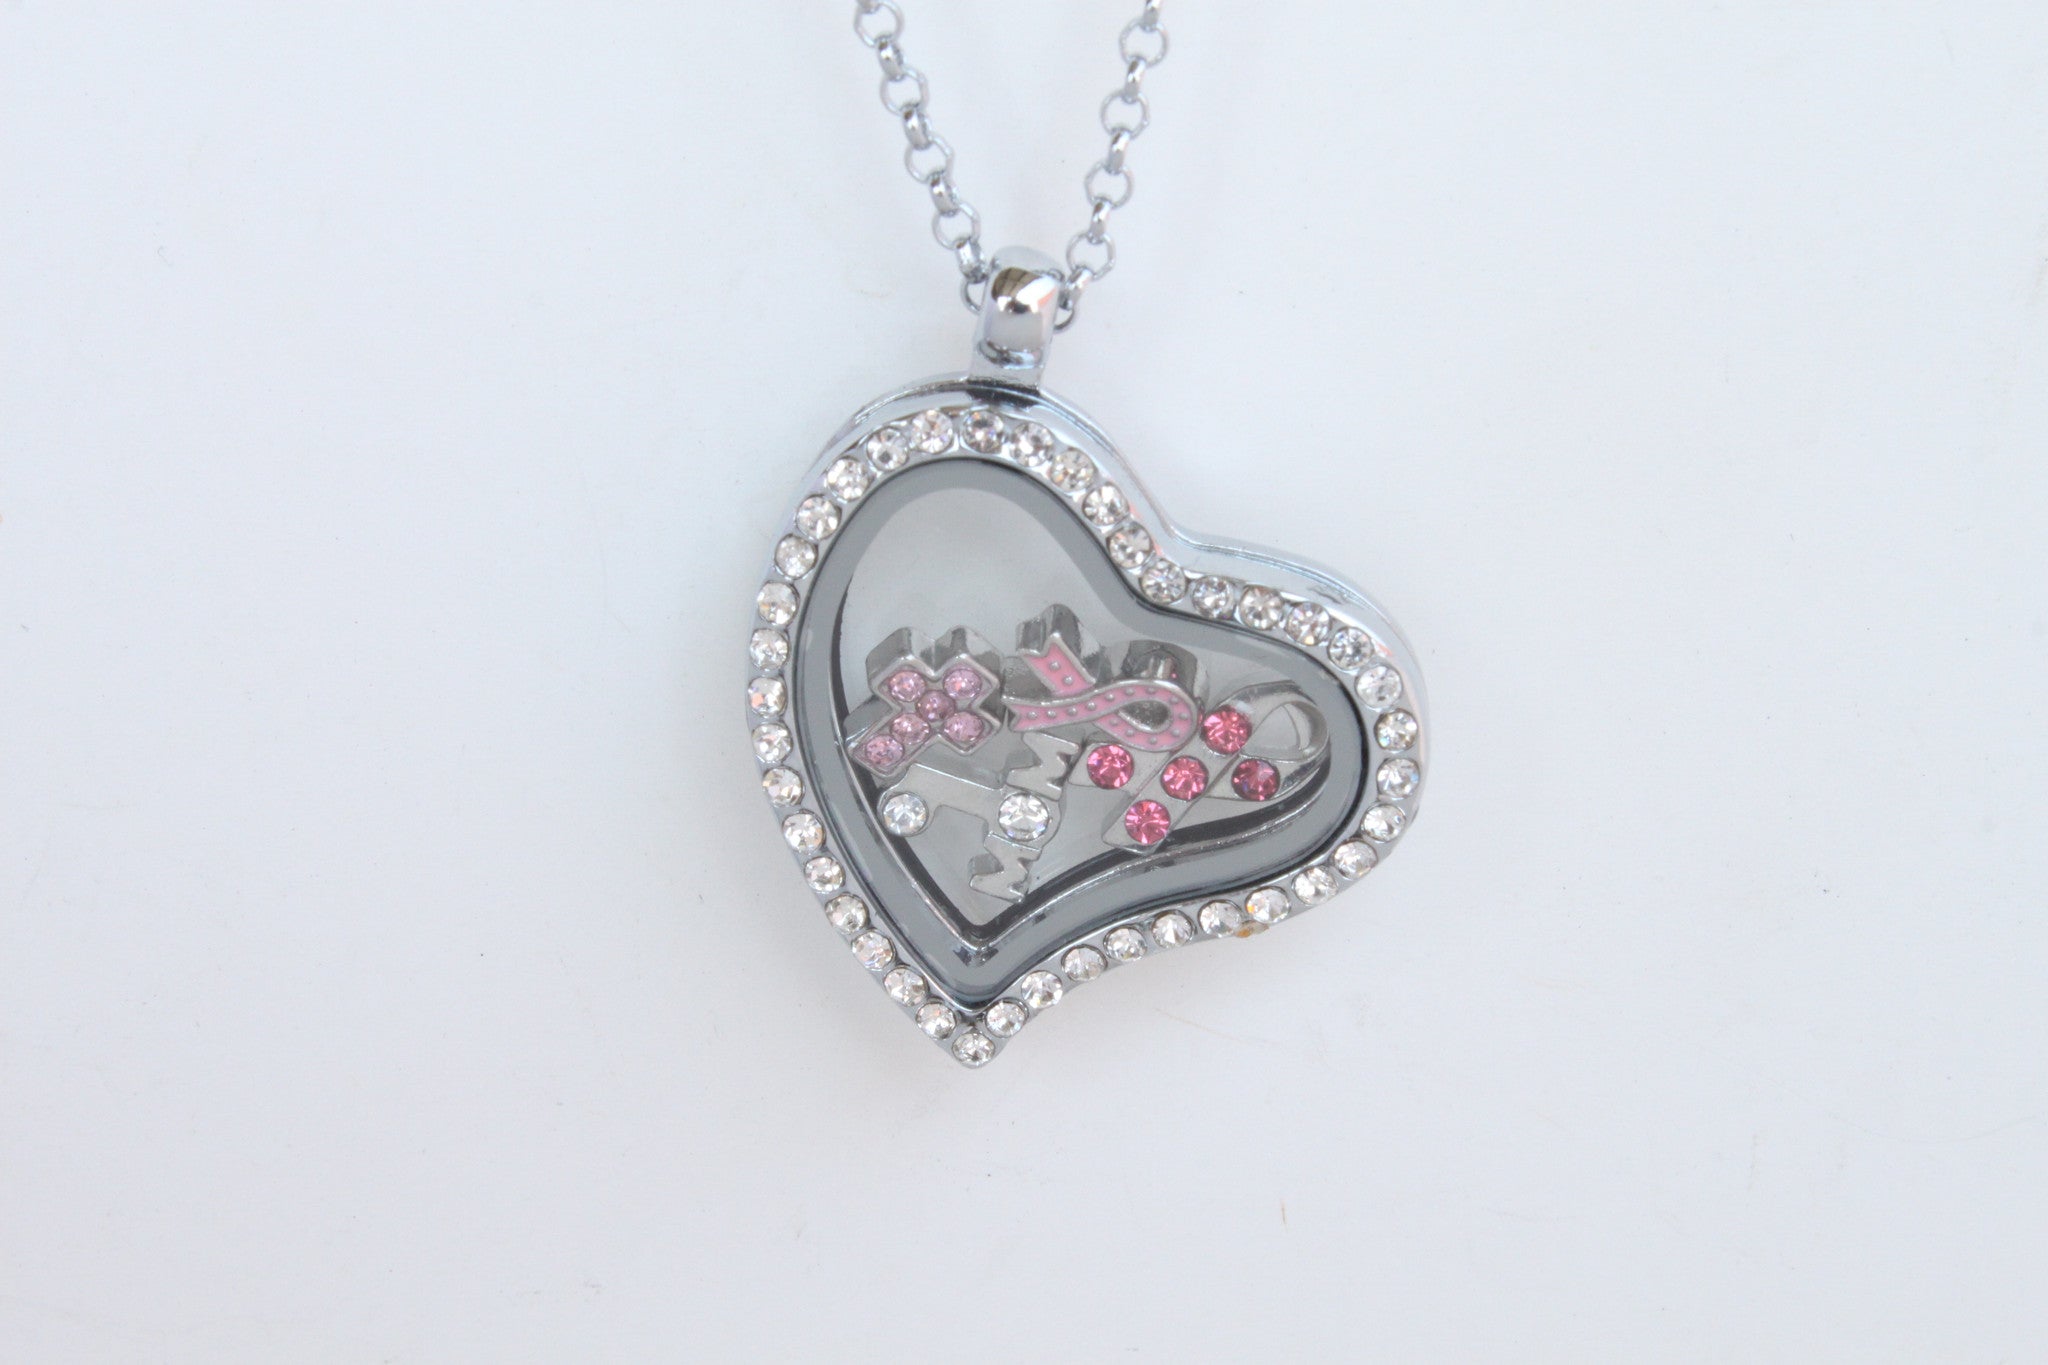 Floating Locket Necklace with 6 Mini Charms and Matching Chain (Silver Rhinestone Heart)